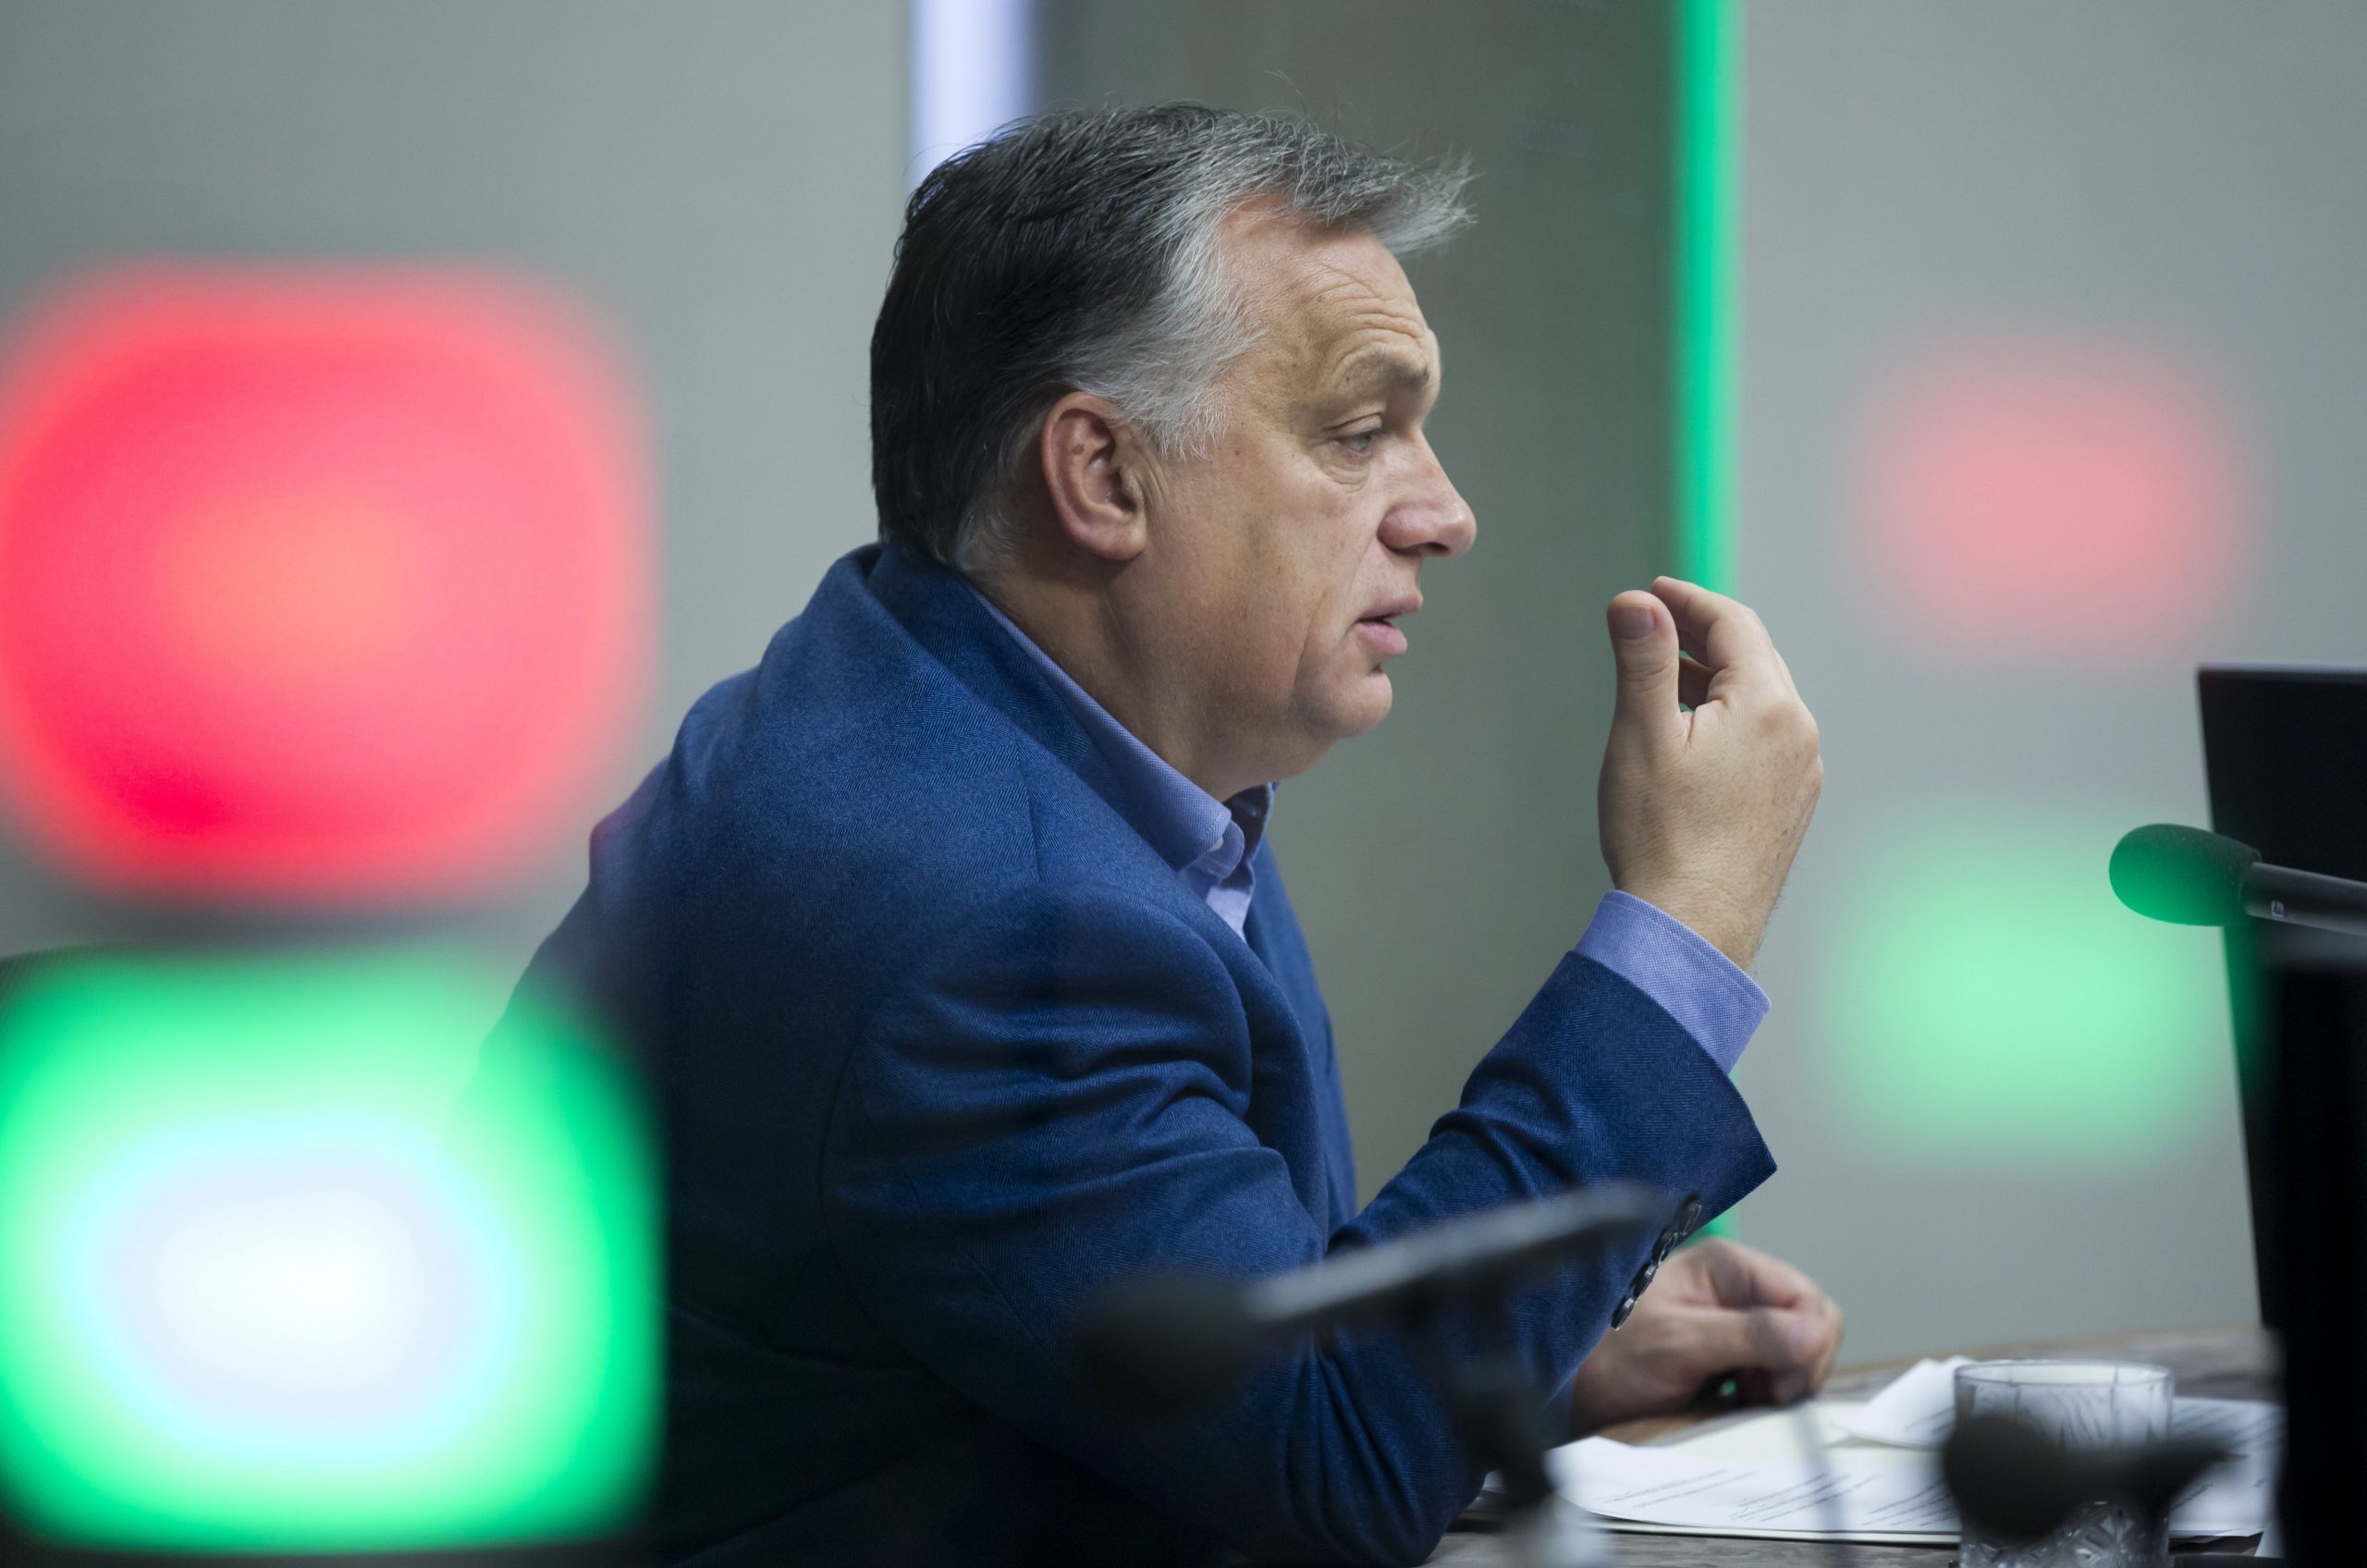 PM Orbán: Child Protection Laws National Competency, Brussels Has Attacked Hungary